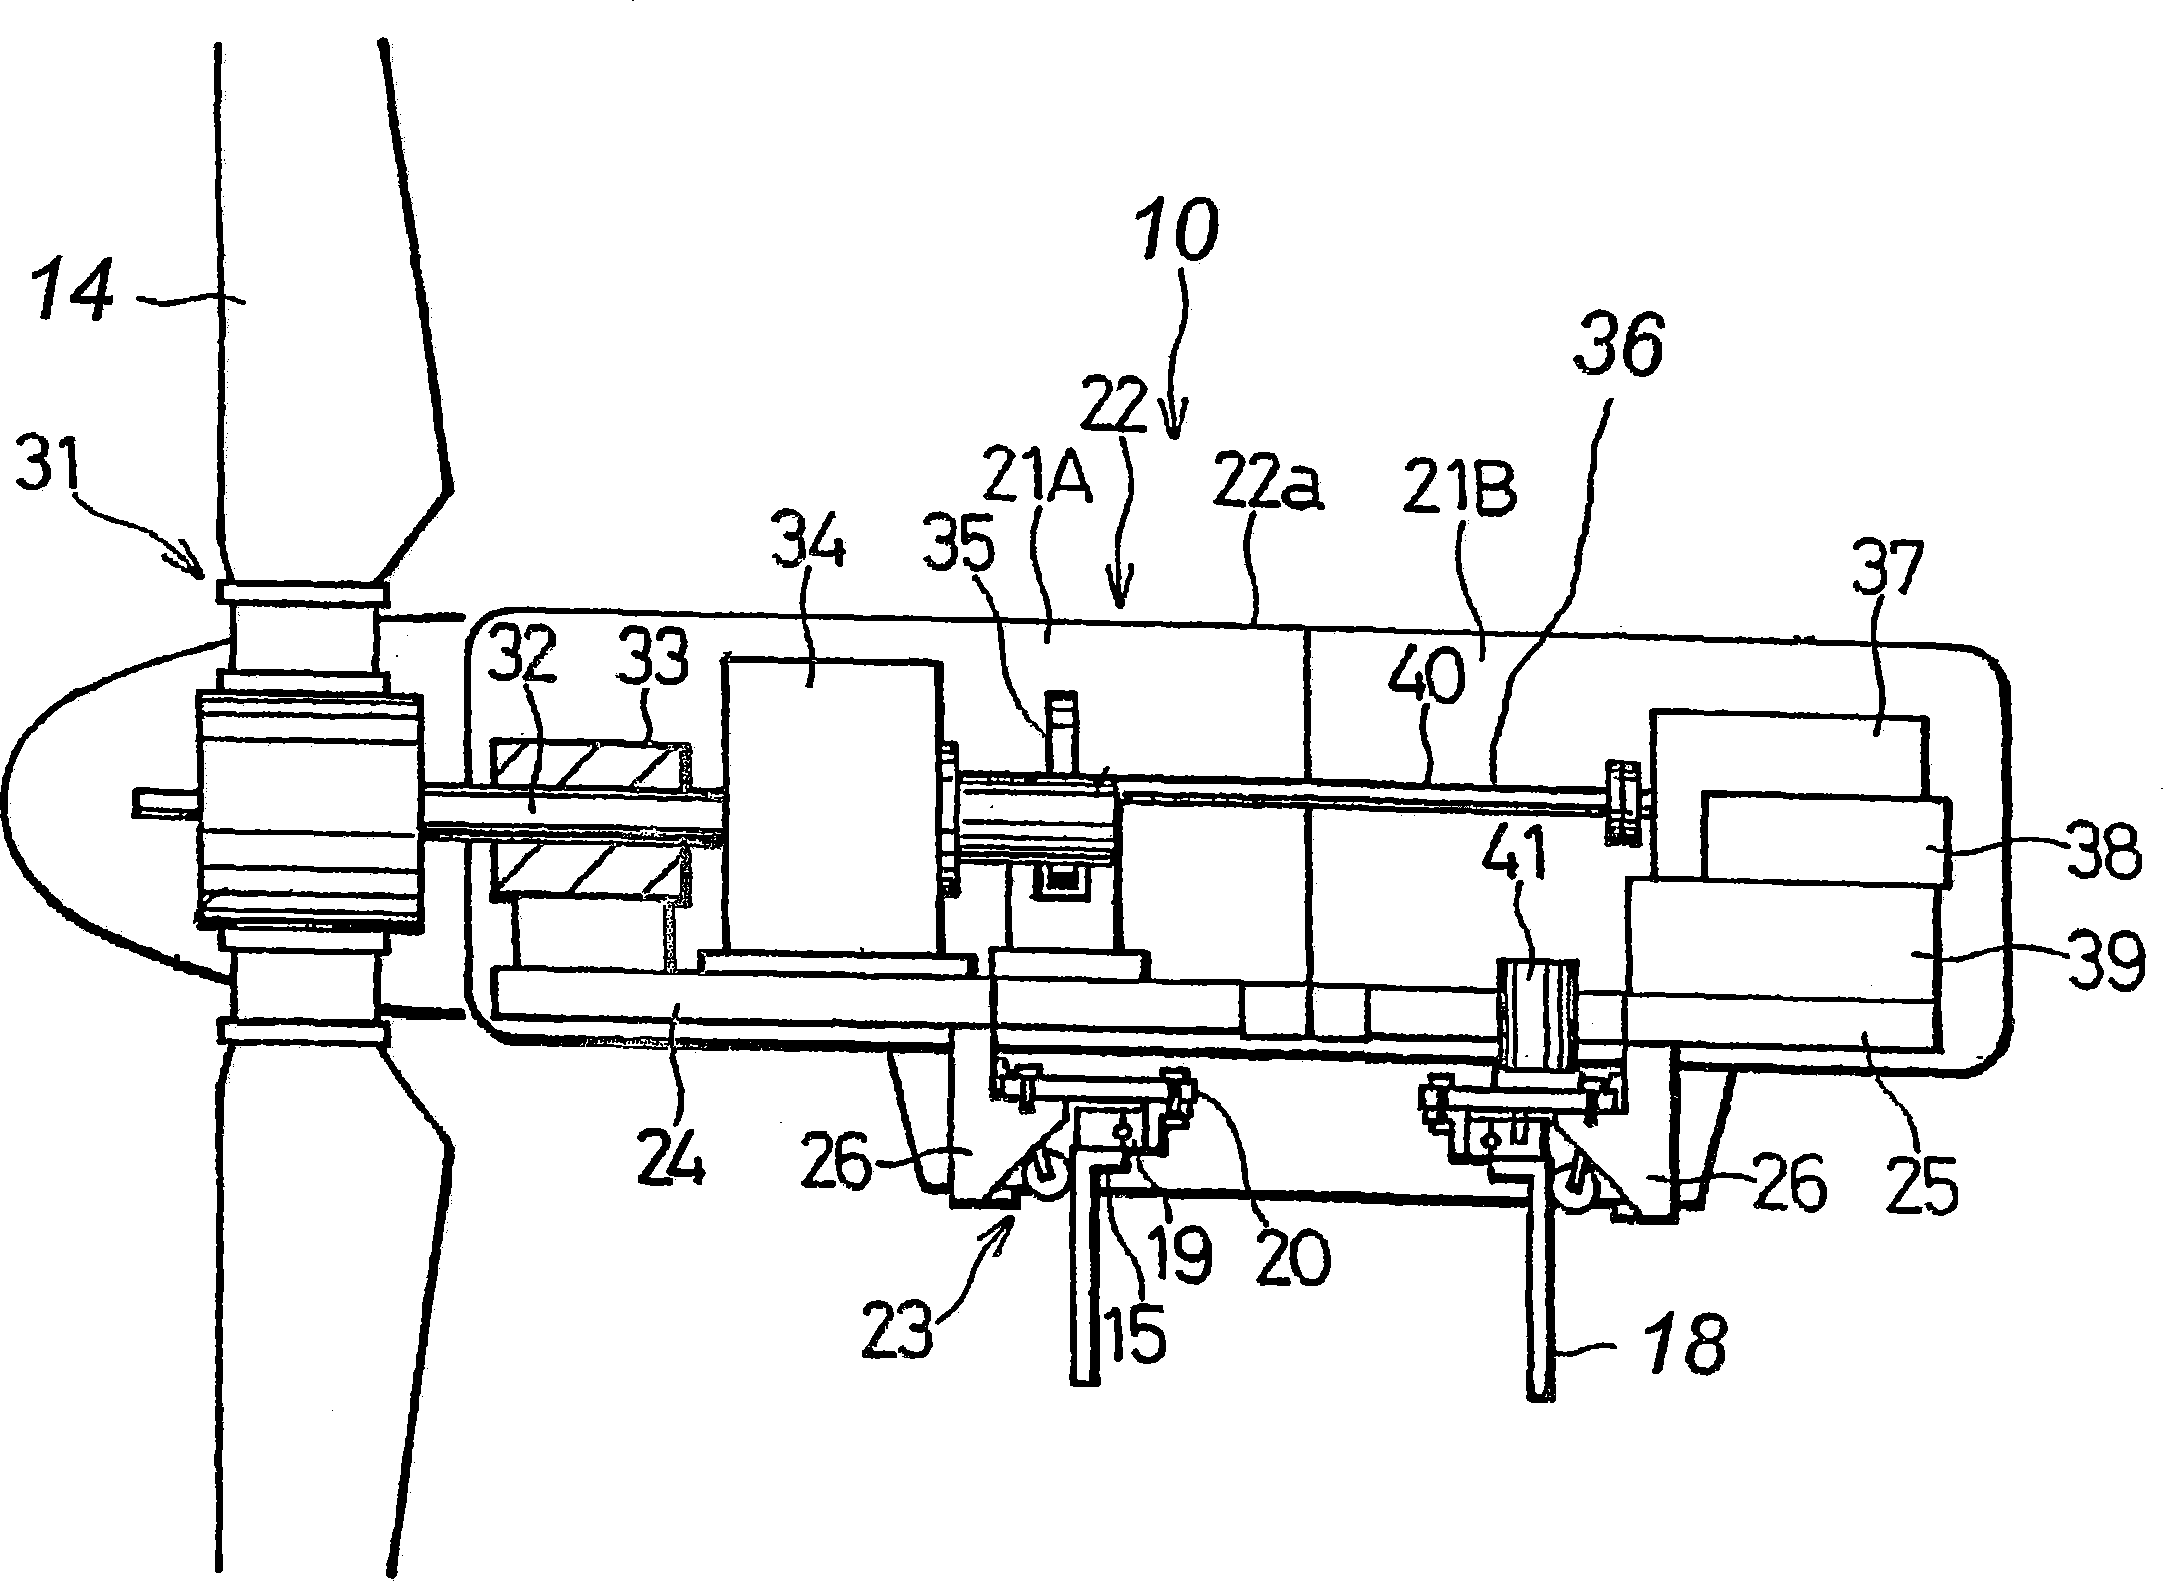 System and process for transporting wind turbines